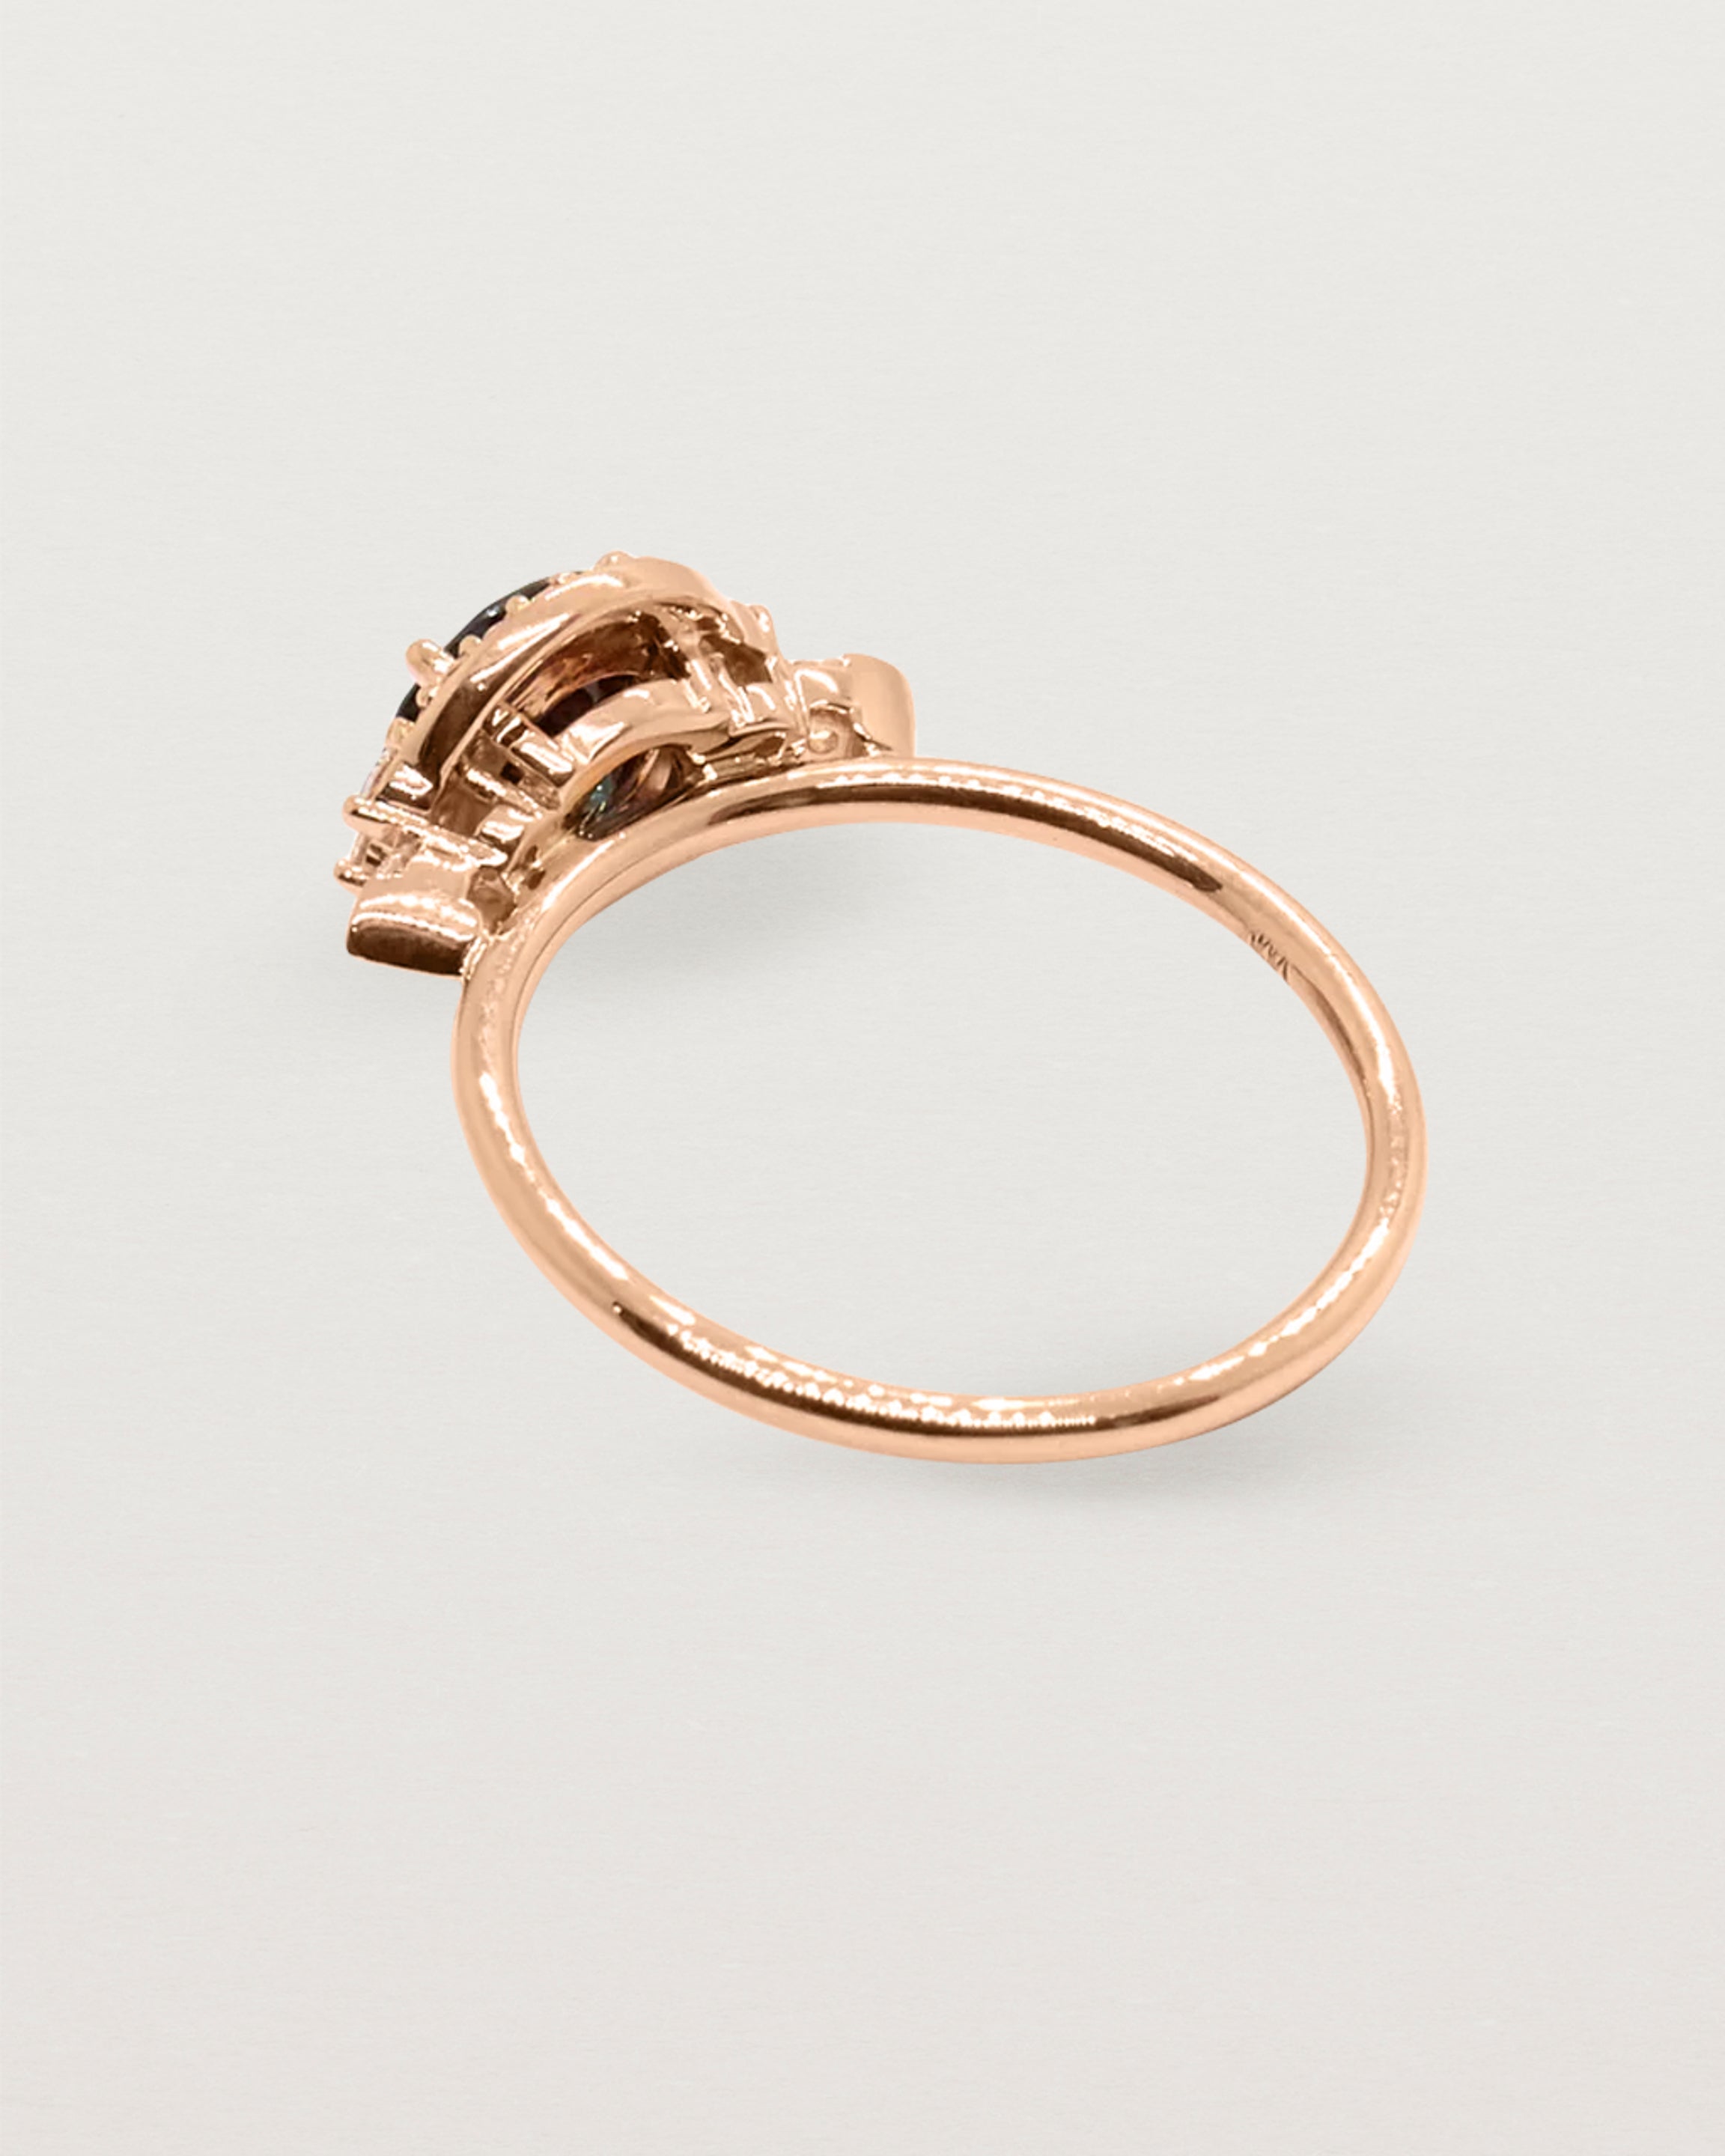 The back view of a rose gold cluster ring